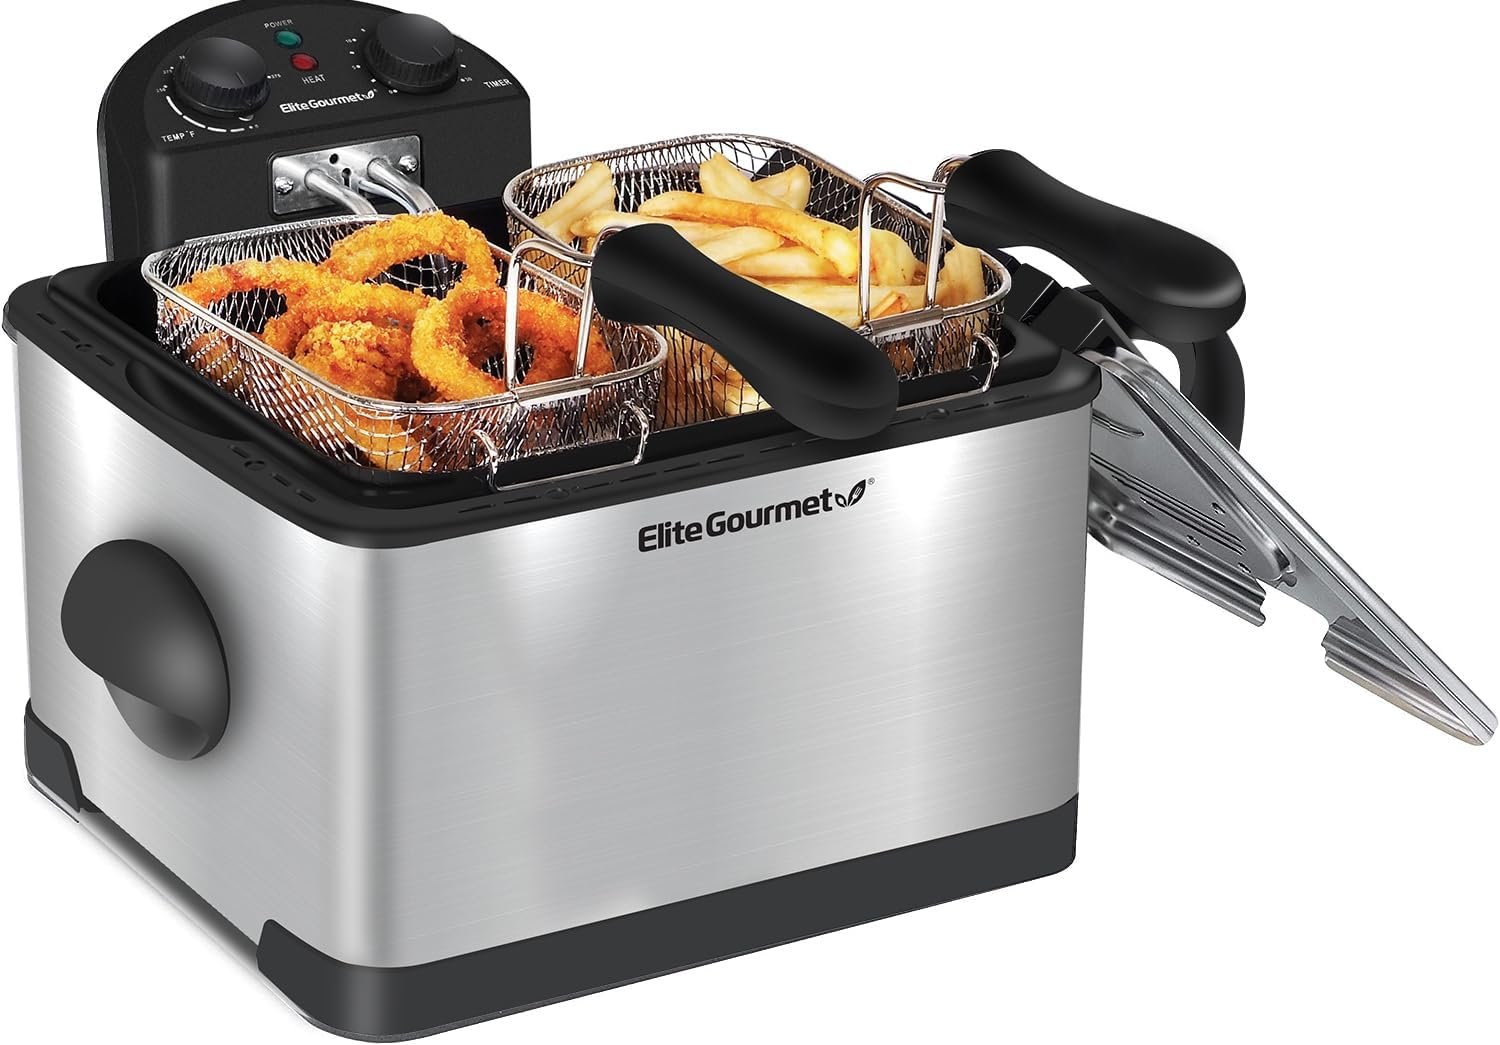 Elite Gourmet EDF-401T# Electric Immersion Deep Fryer 3-Baskets, 1700-Watt, Timer Control Adjustable Temperature, Lid with Viewing Window and Odor Free Filter, Stainless Steel and Granite